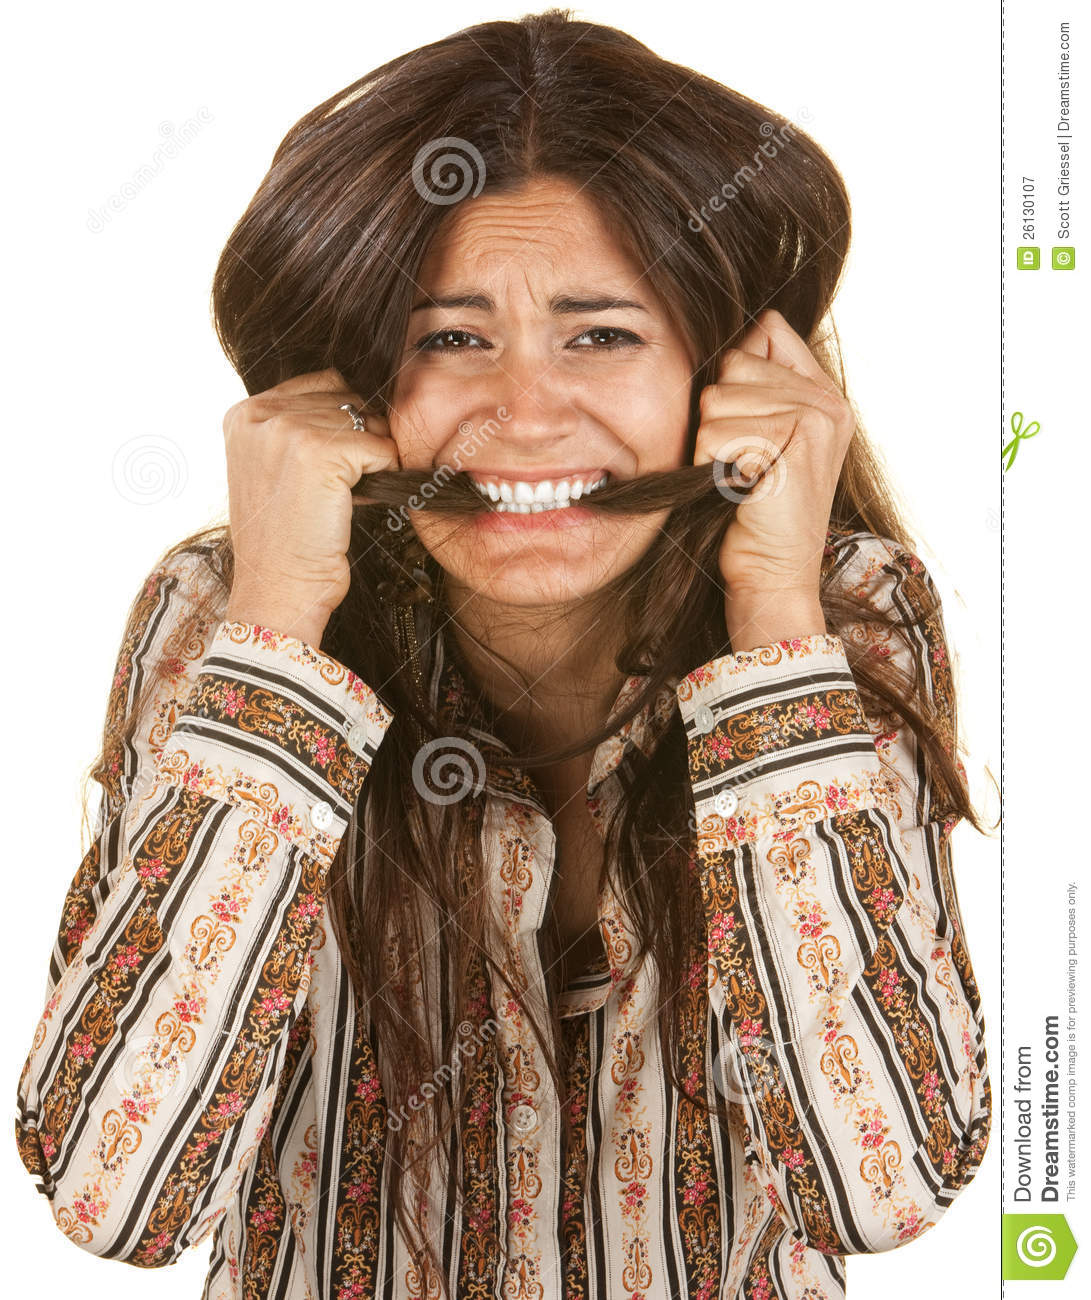 Frantic Woman Biting Her Hair Royalty Free Stock Photography   Image